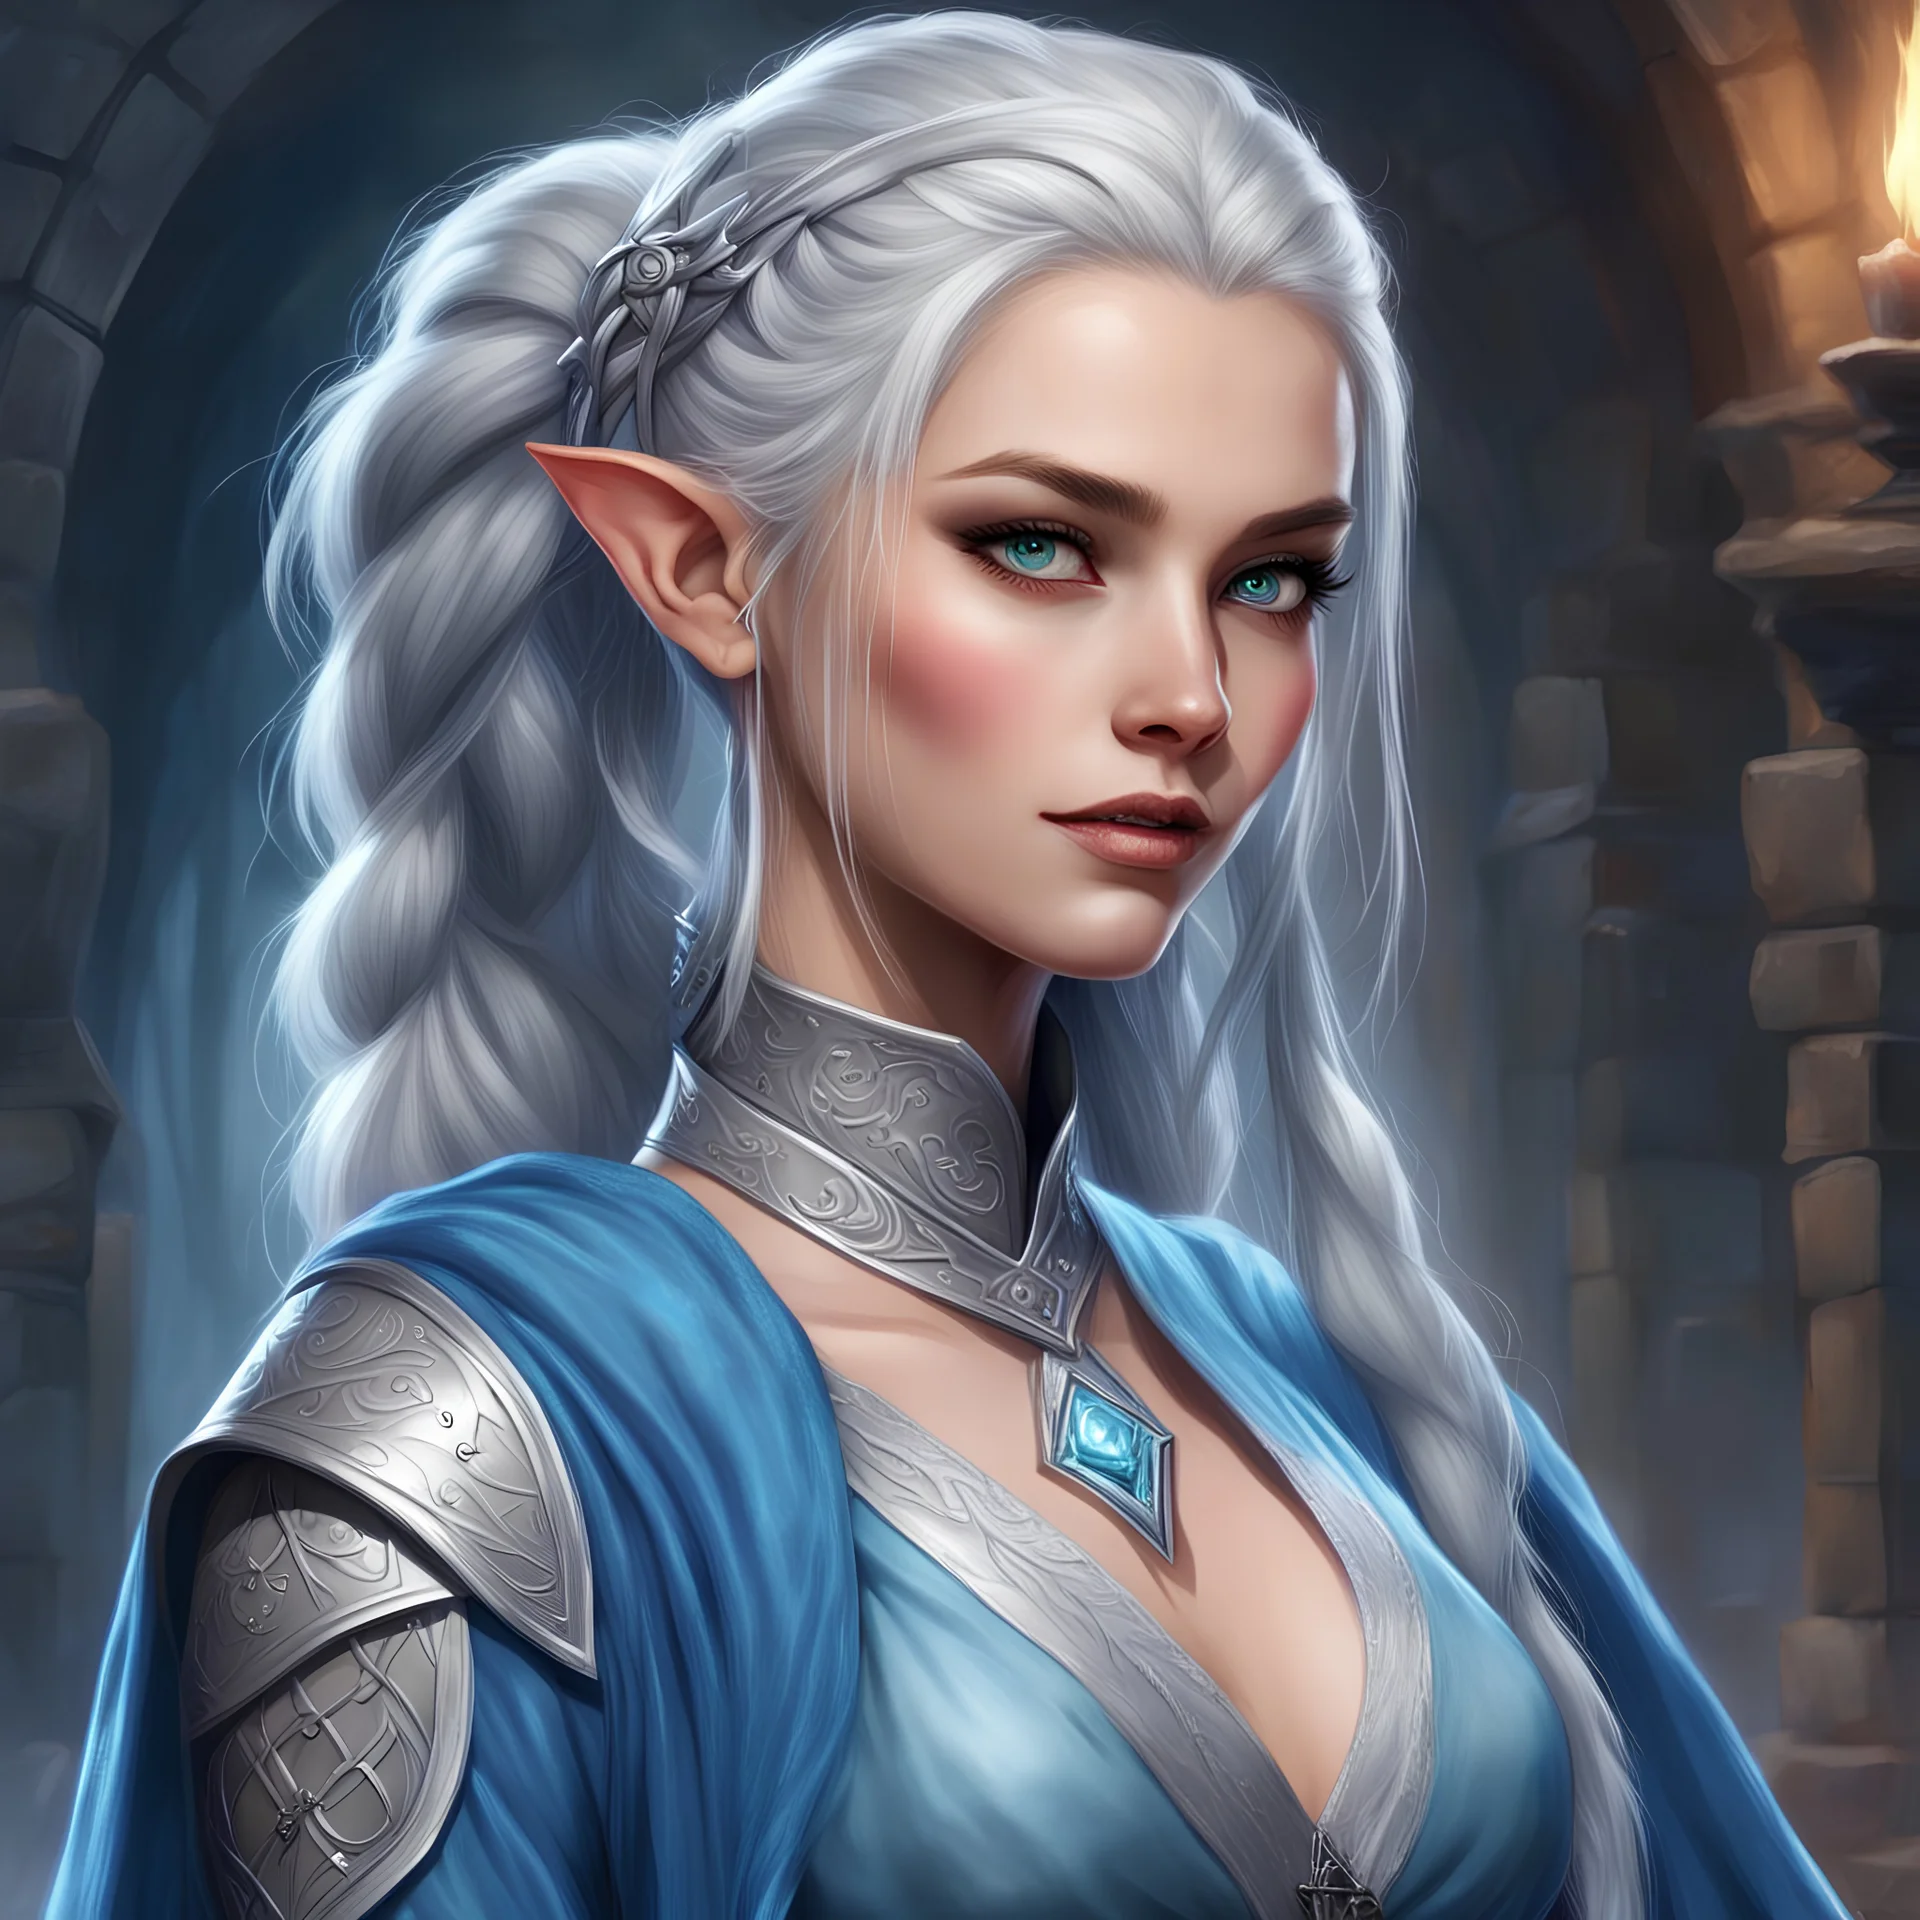 dungeons & dragons; fantasy; digital art; female; sorceress; silver eyes; silver hair; braided ponytail; young; long veil; teenager; pretty; half-elf; cute; welcoming; confident; elegant clothes; warm colored clothes; clothes with blue fabric